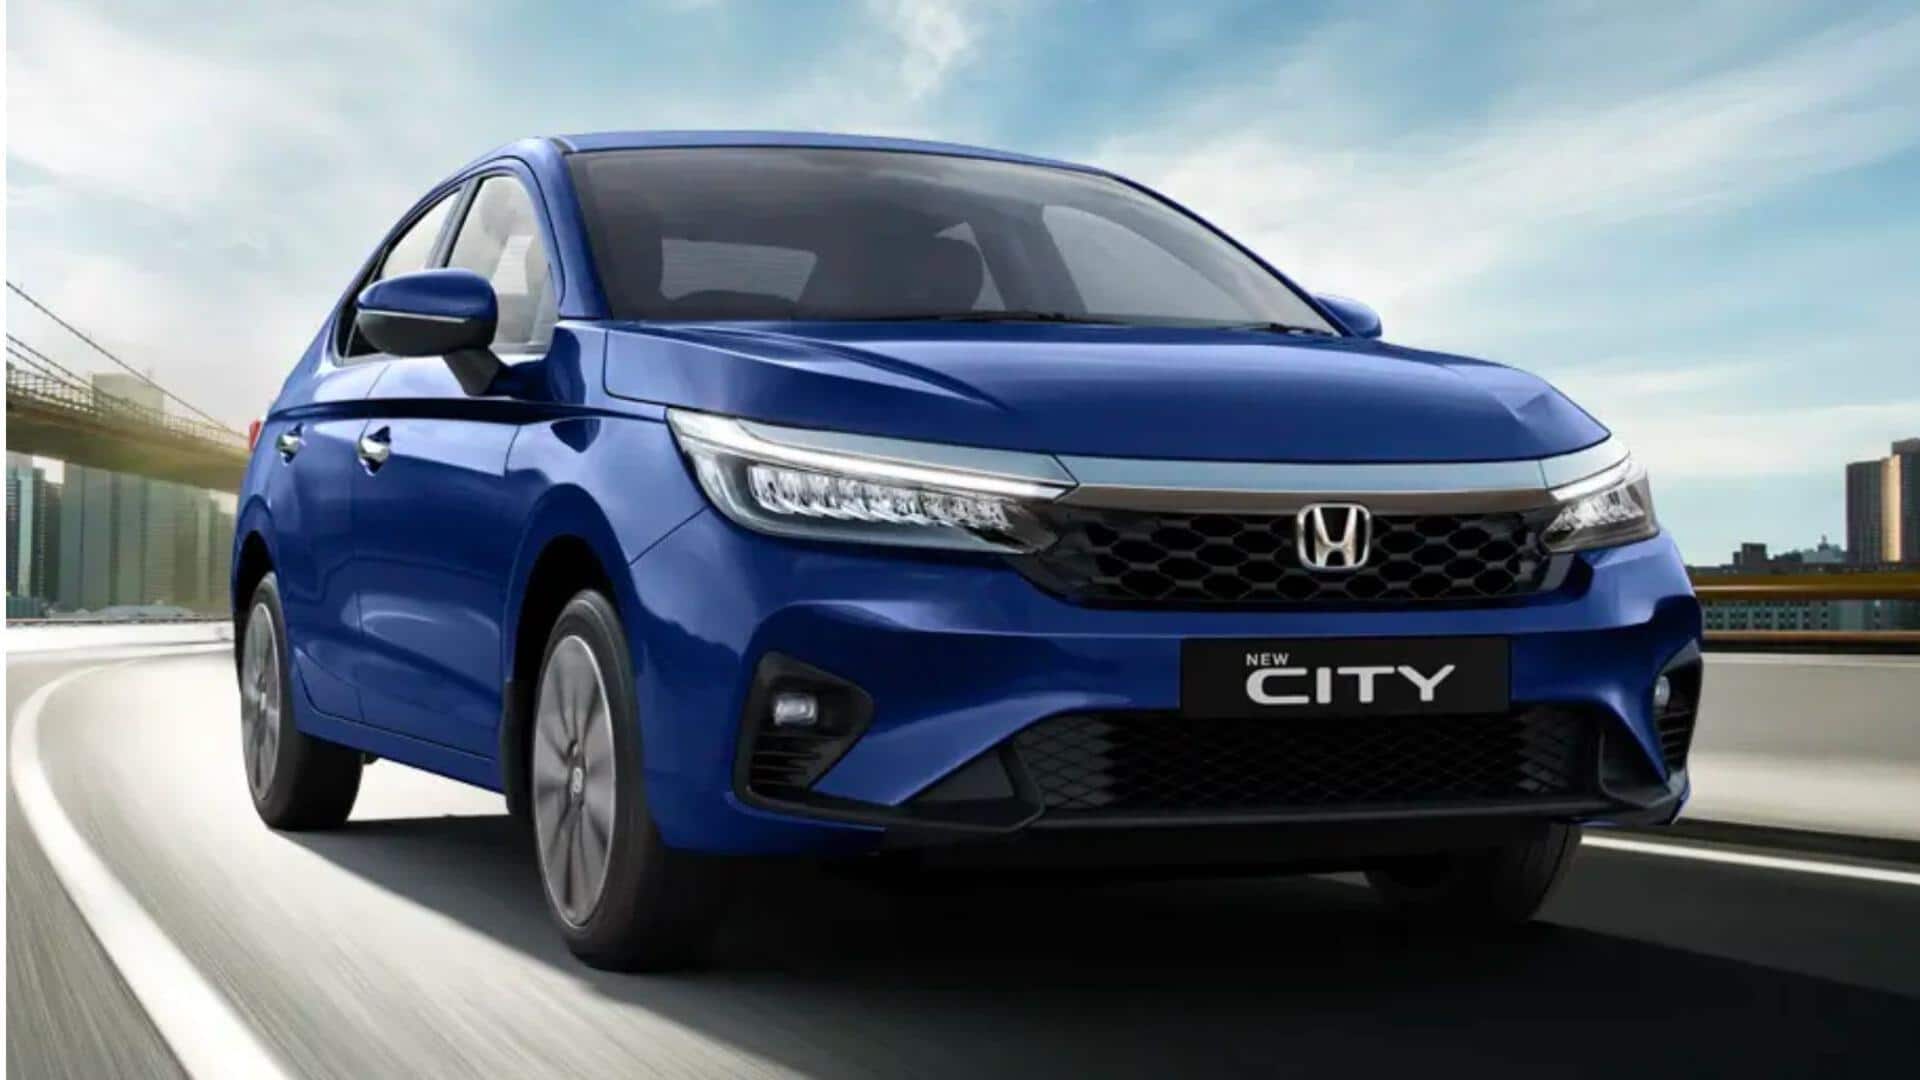 Honda City and Amaze become more expensive: Check new prices